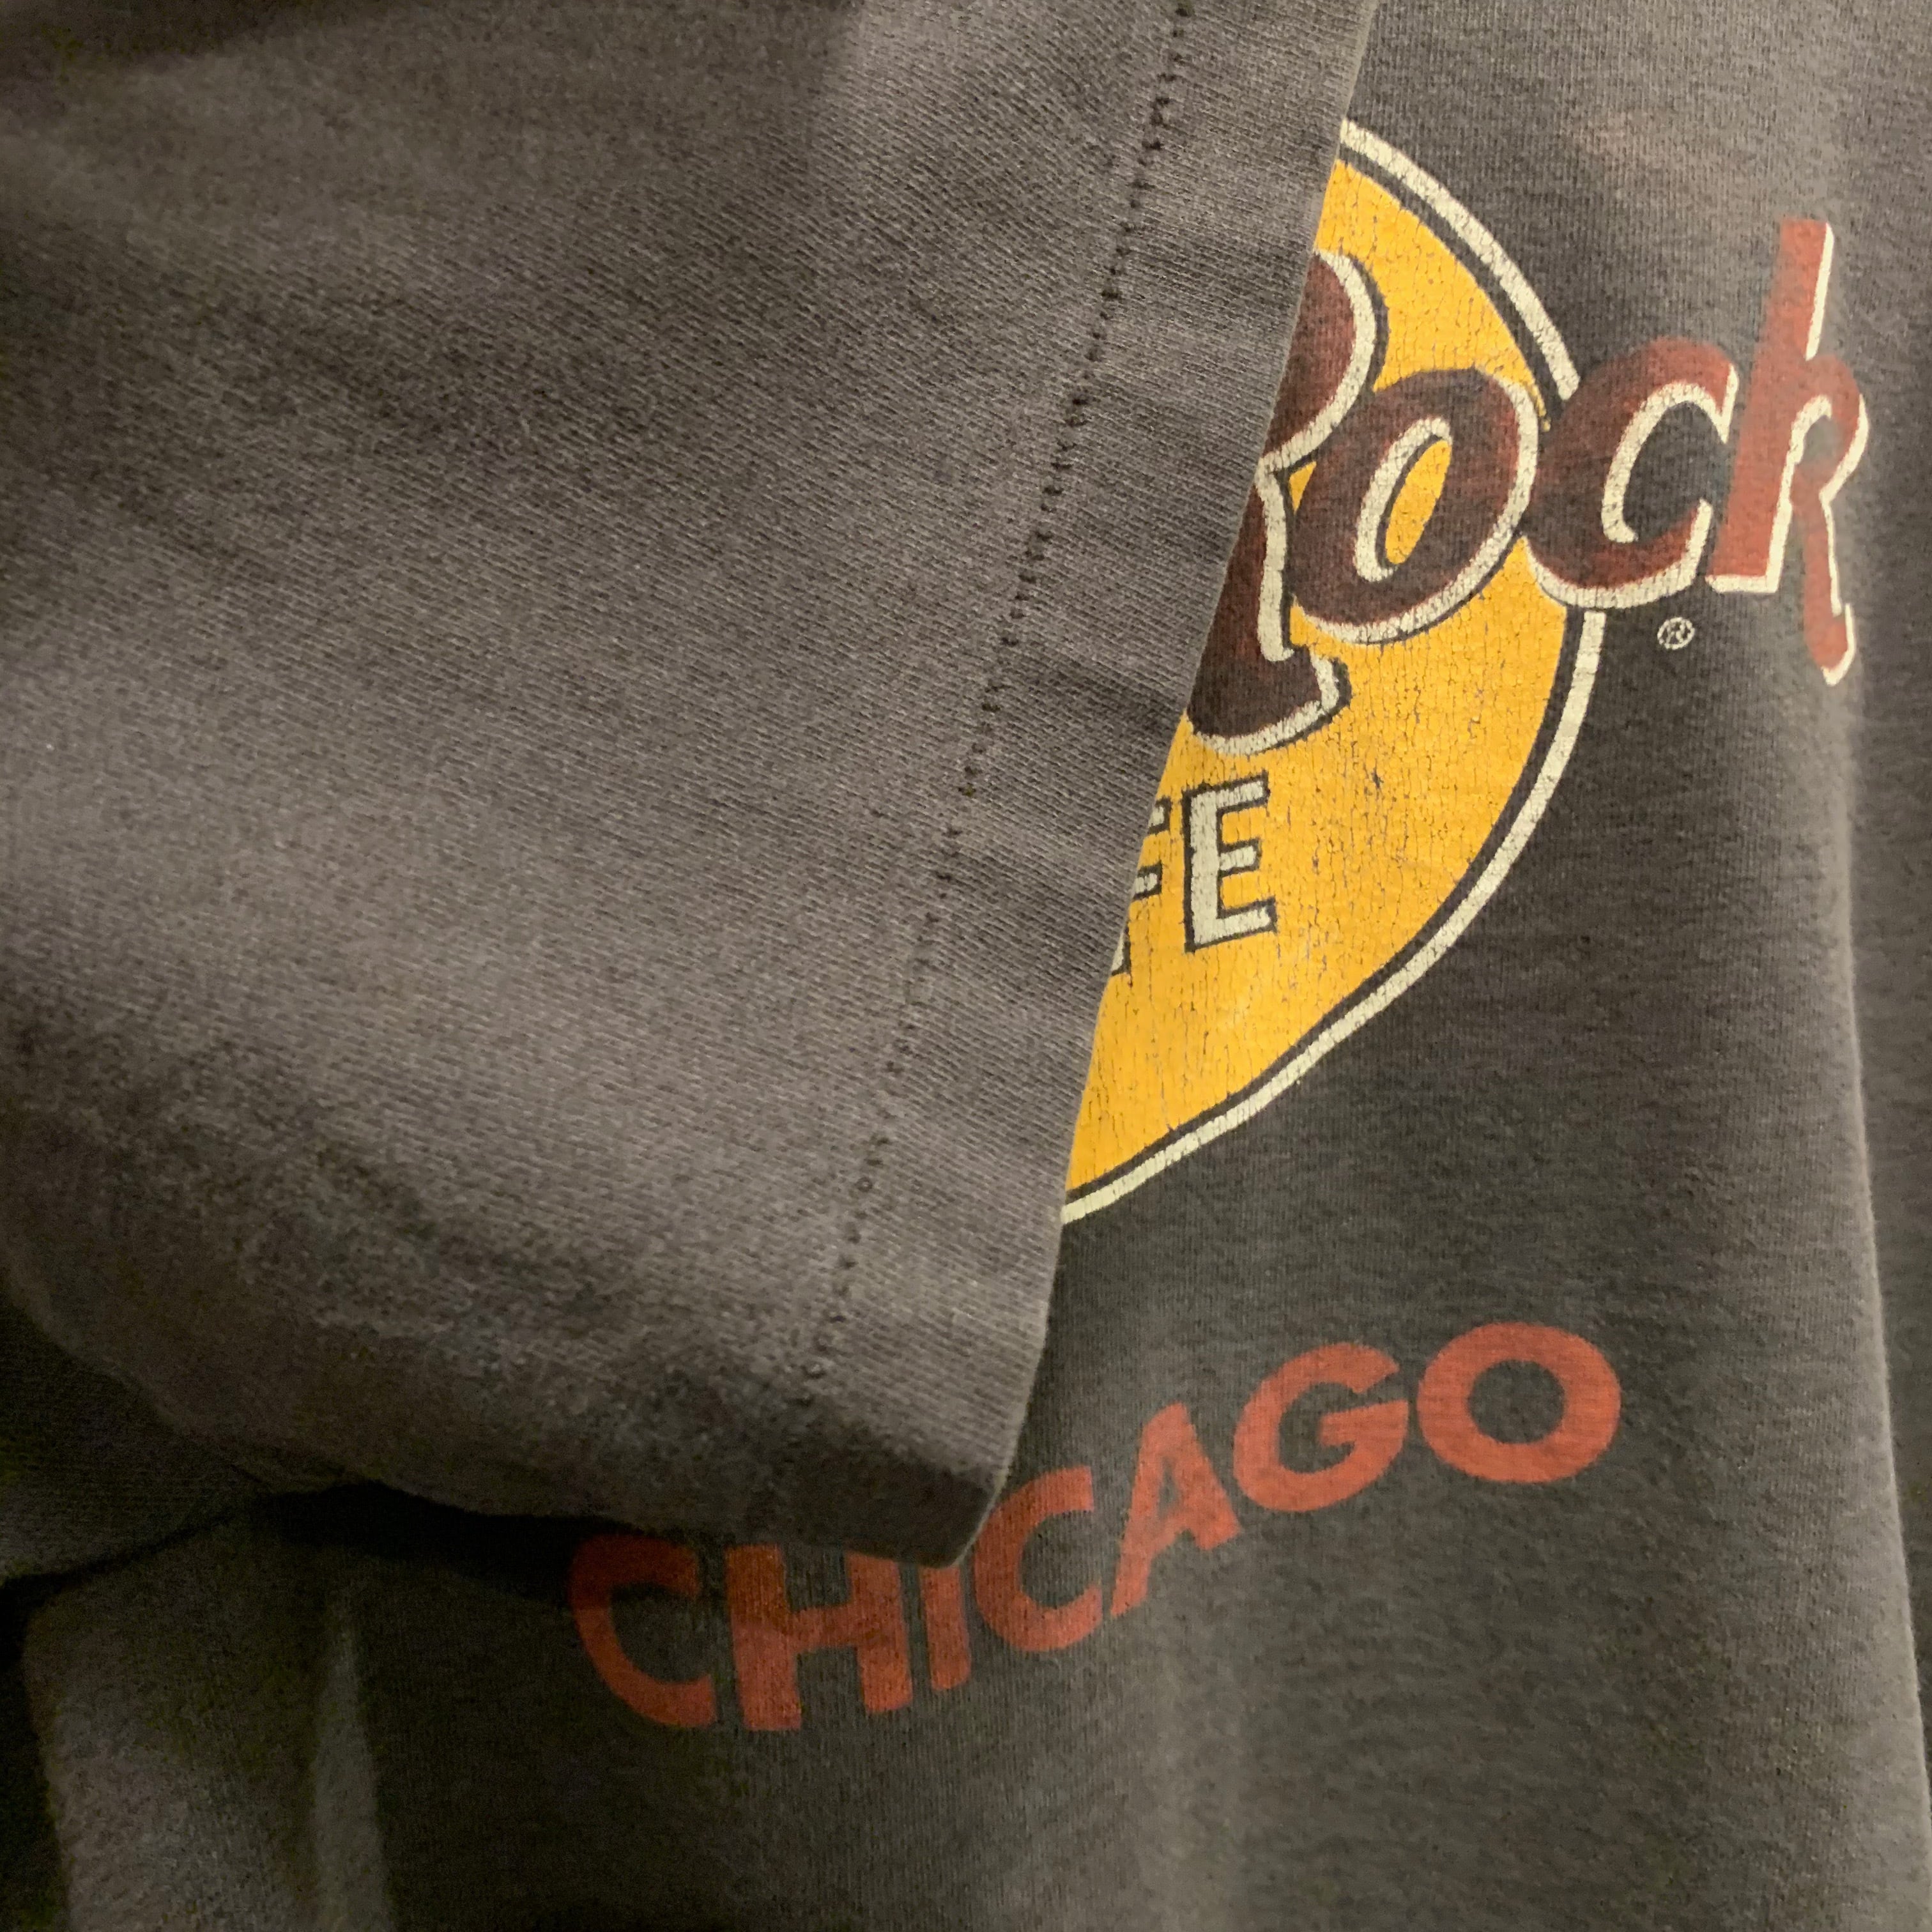 Vintage 90' Hard Rock Cafe CHICAGO T-shirts ハードロックカフェシカゴ 半袖Tシャツ XL  ヴィンテージ/1220063 | number12 powered by BASE